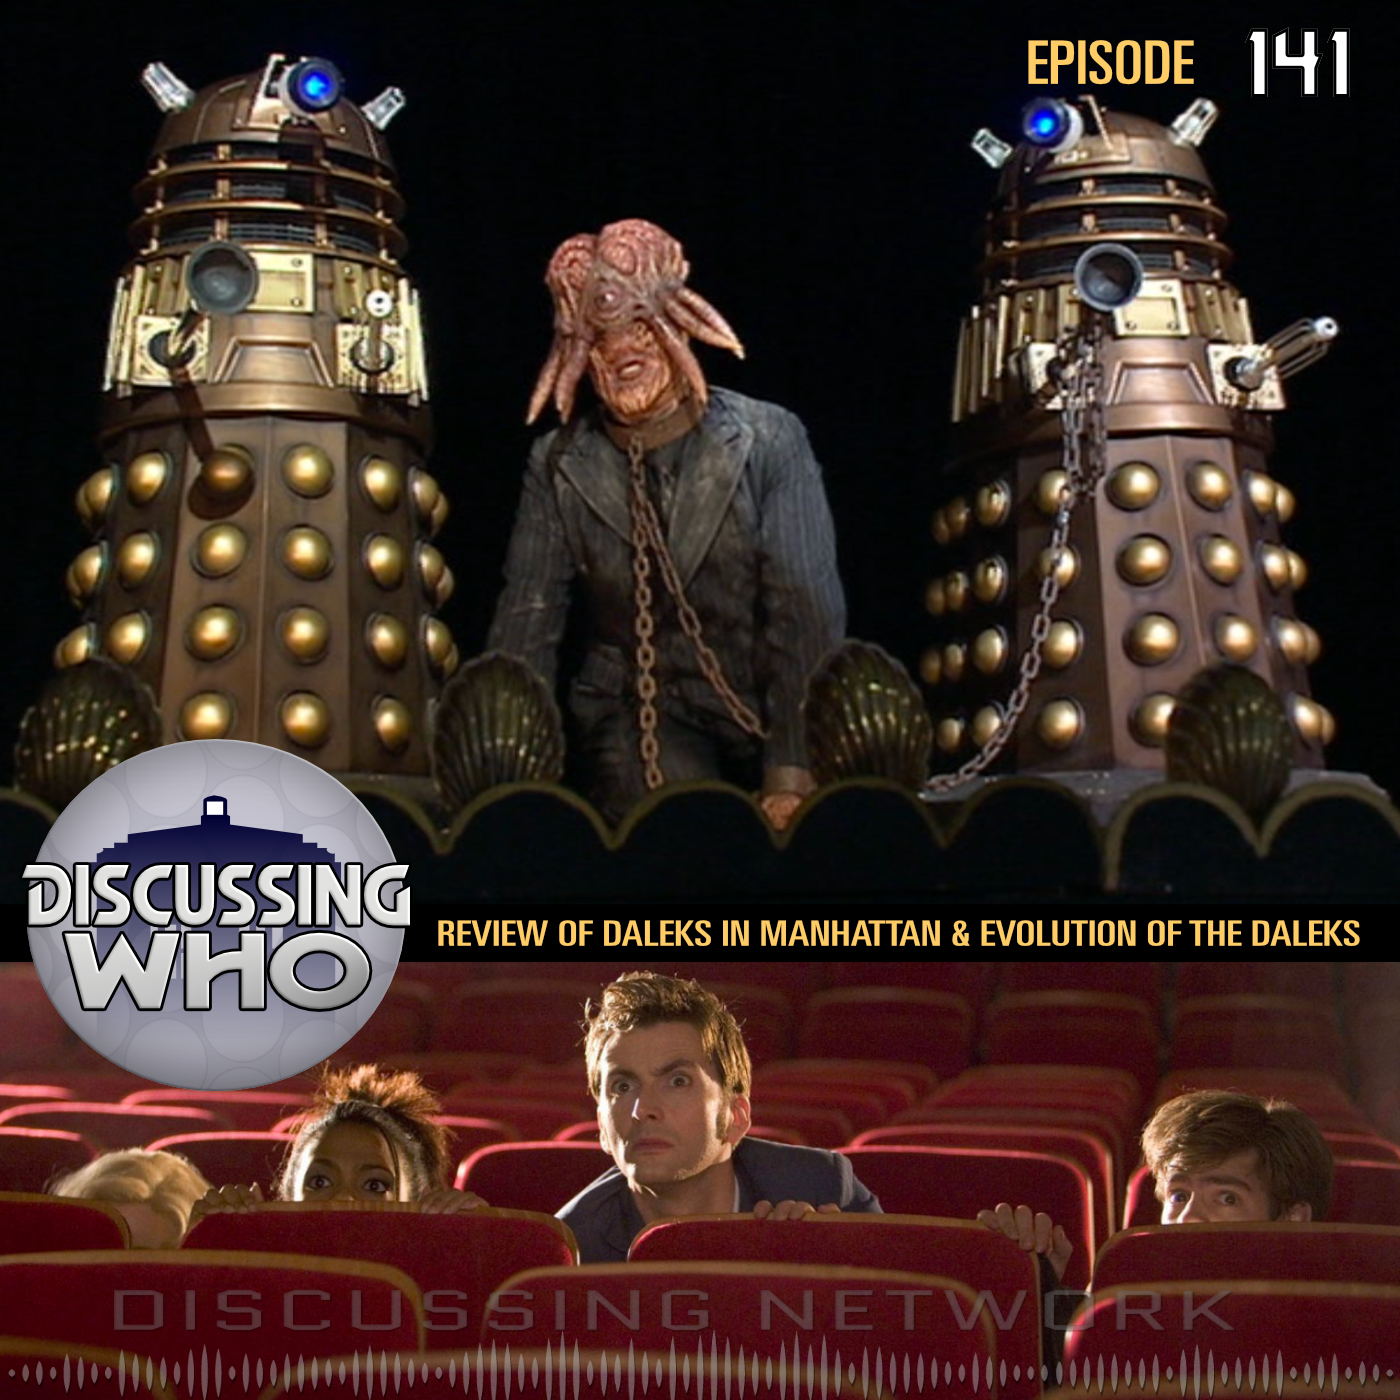 Review of Daleks in Manhattan and Evolution of the Daleks